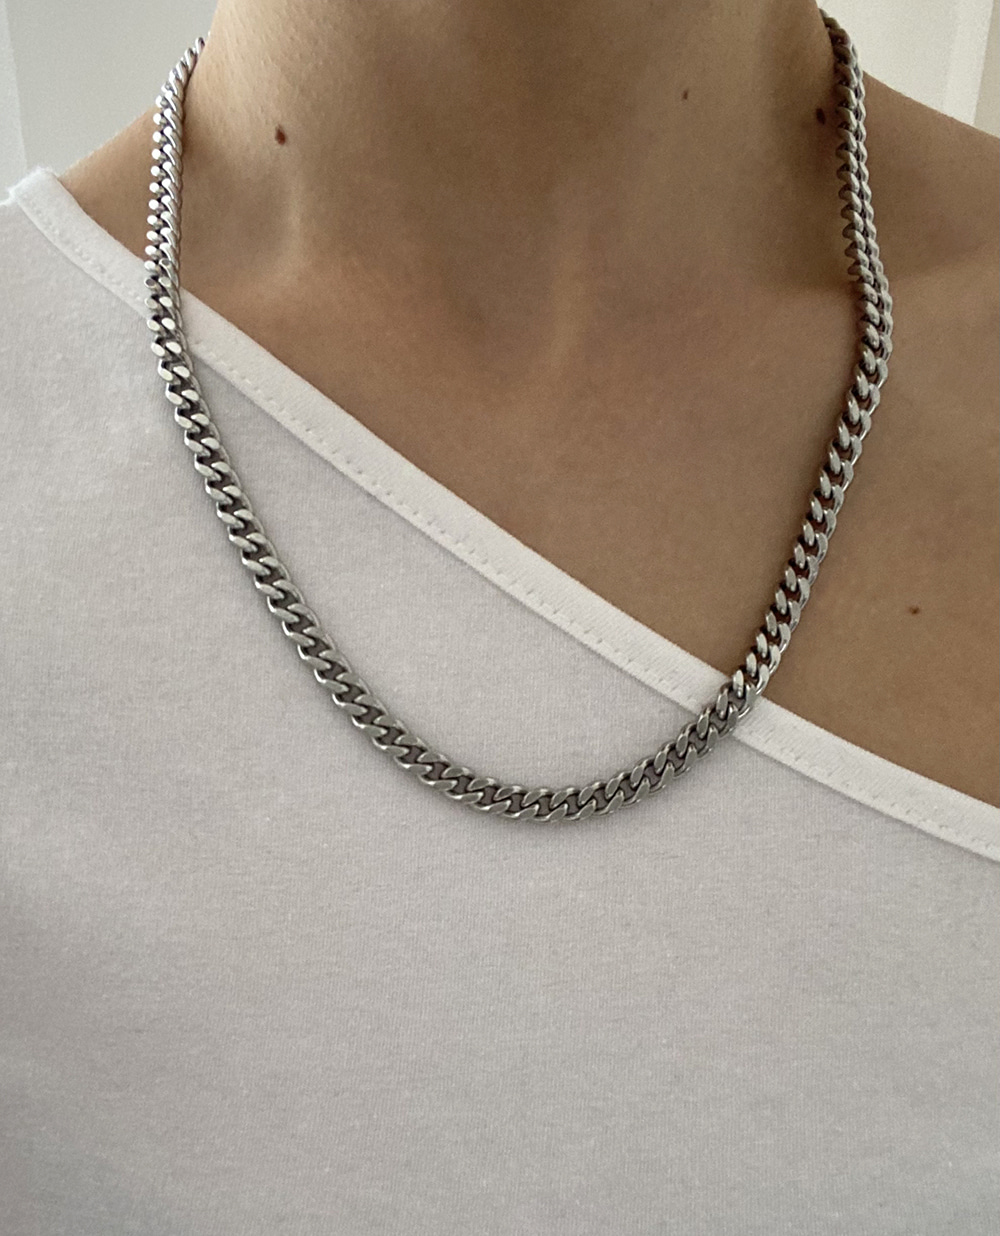 surgical chain necklace